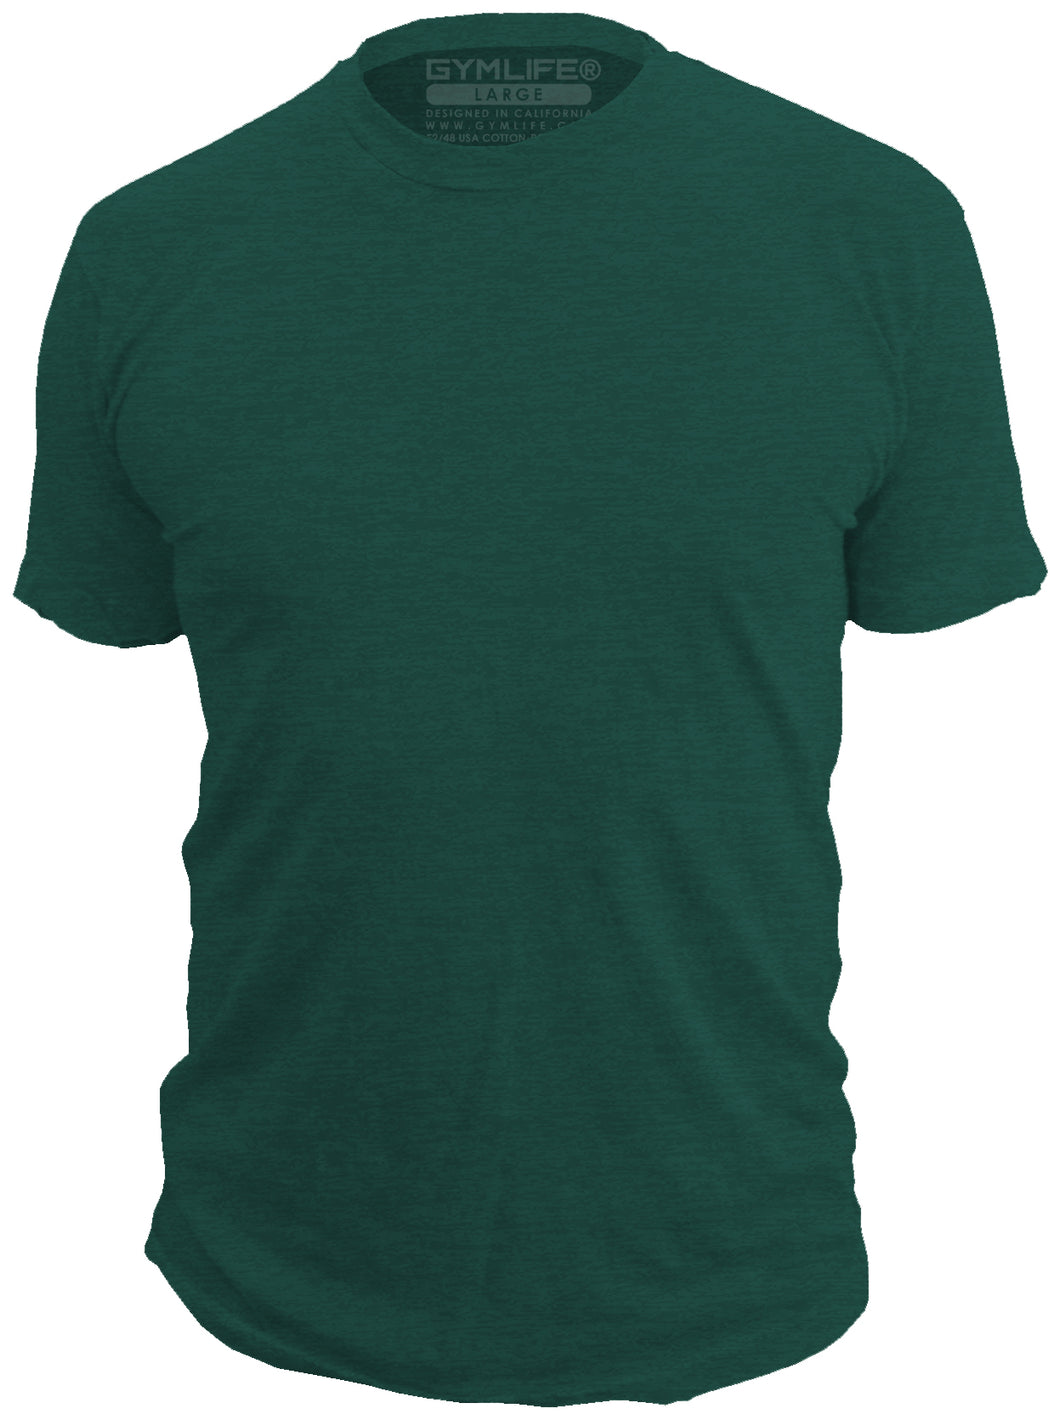 GYM LIFE - BLANK - Mens Athletic 52/48 Premium T-Shirt, Made of USA, Forest Green Heather